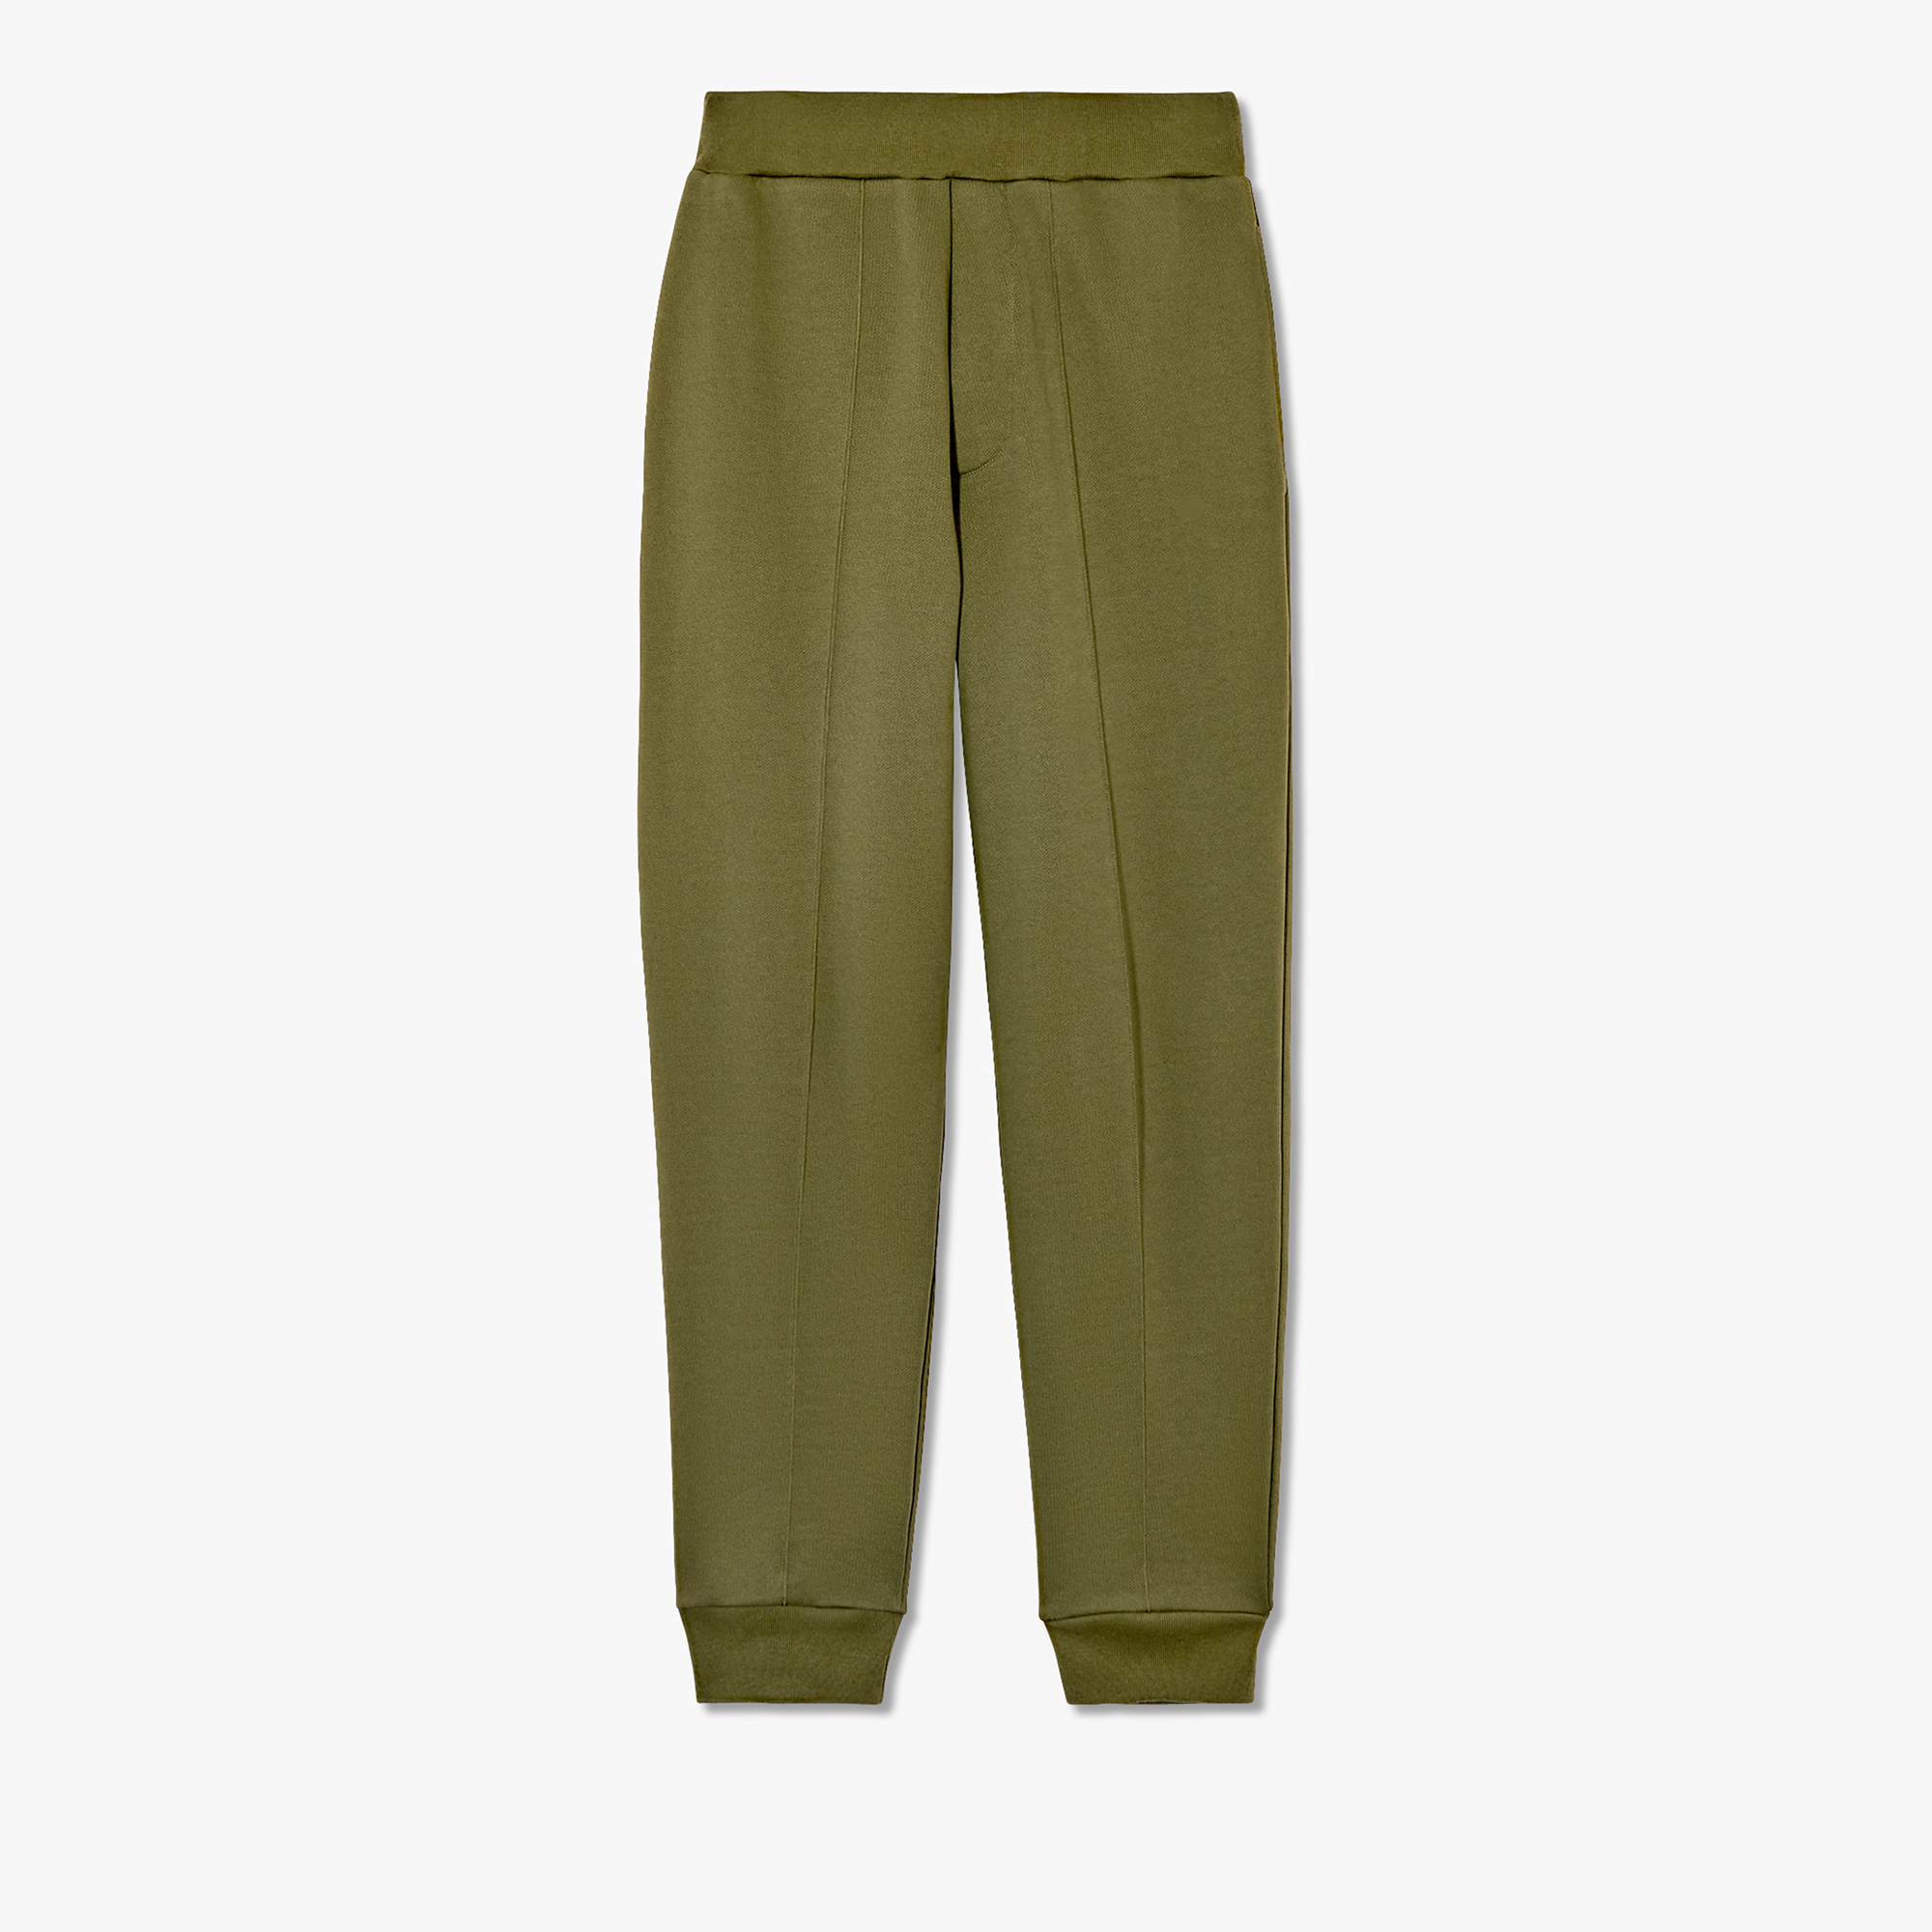 Jogging Trousers With Embroidered Logo, MILITARY KAKI, hi-res